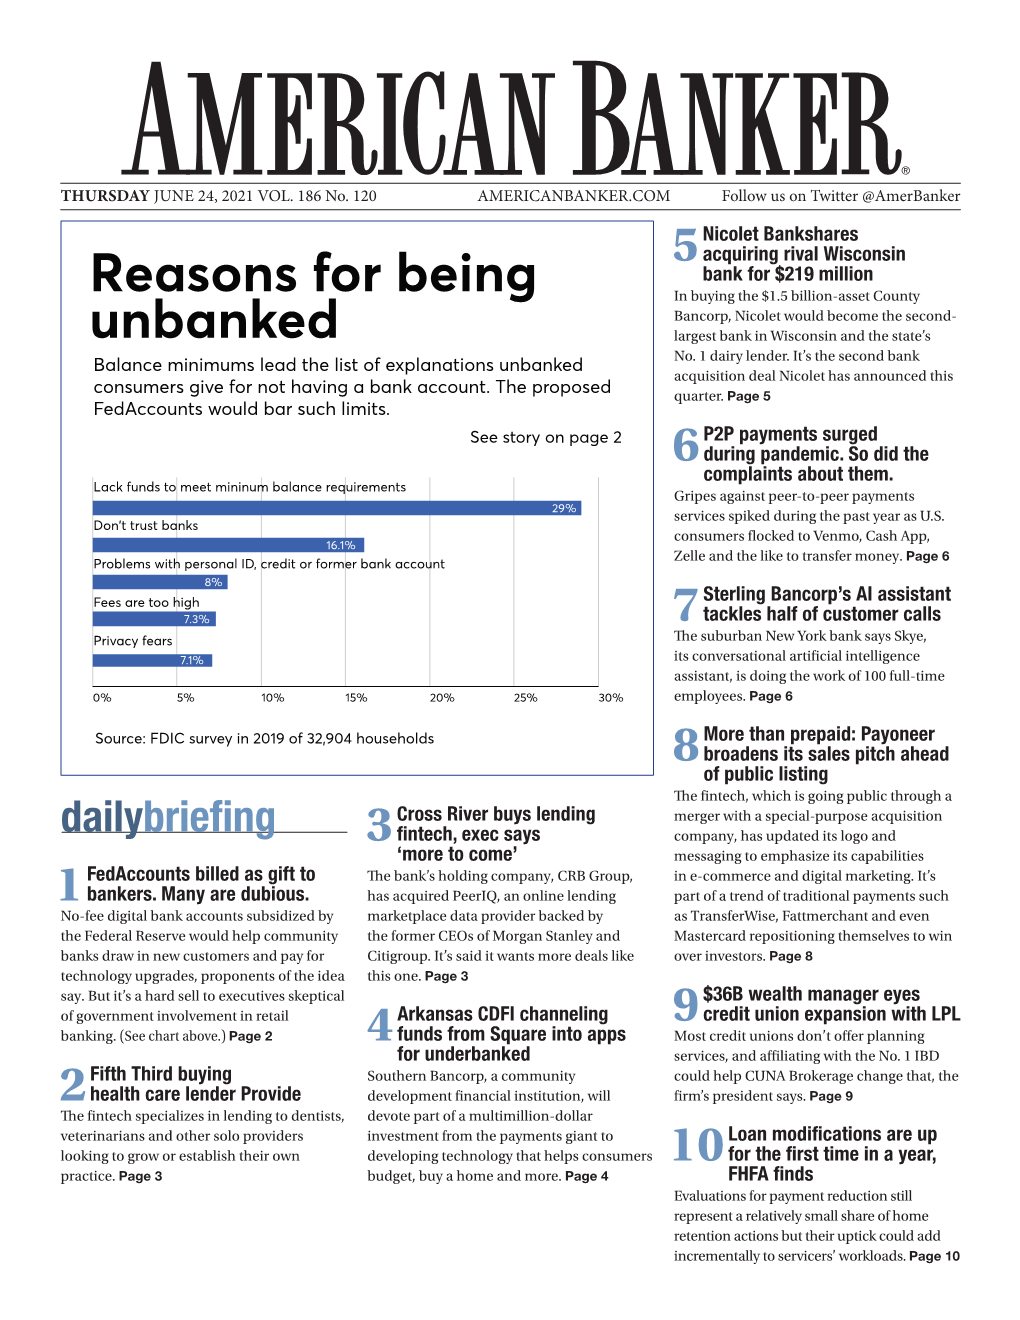 Reasons for Being Unbanked